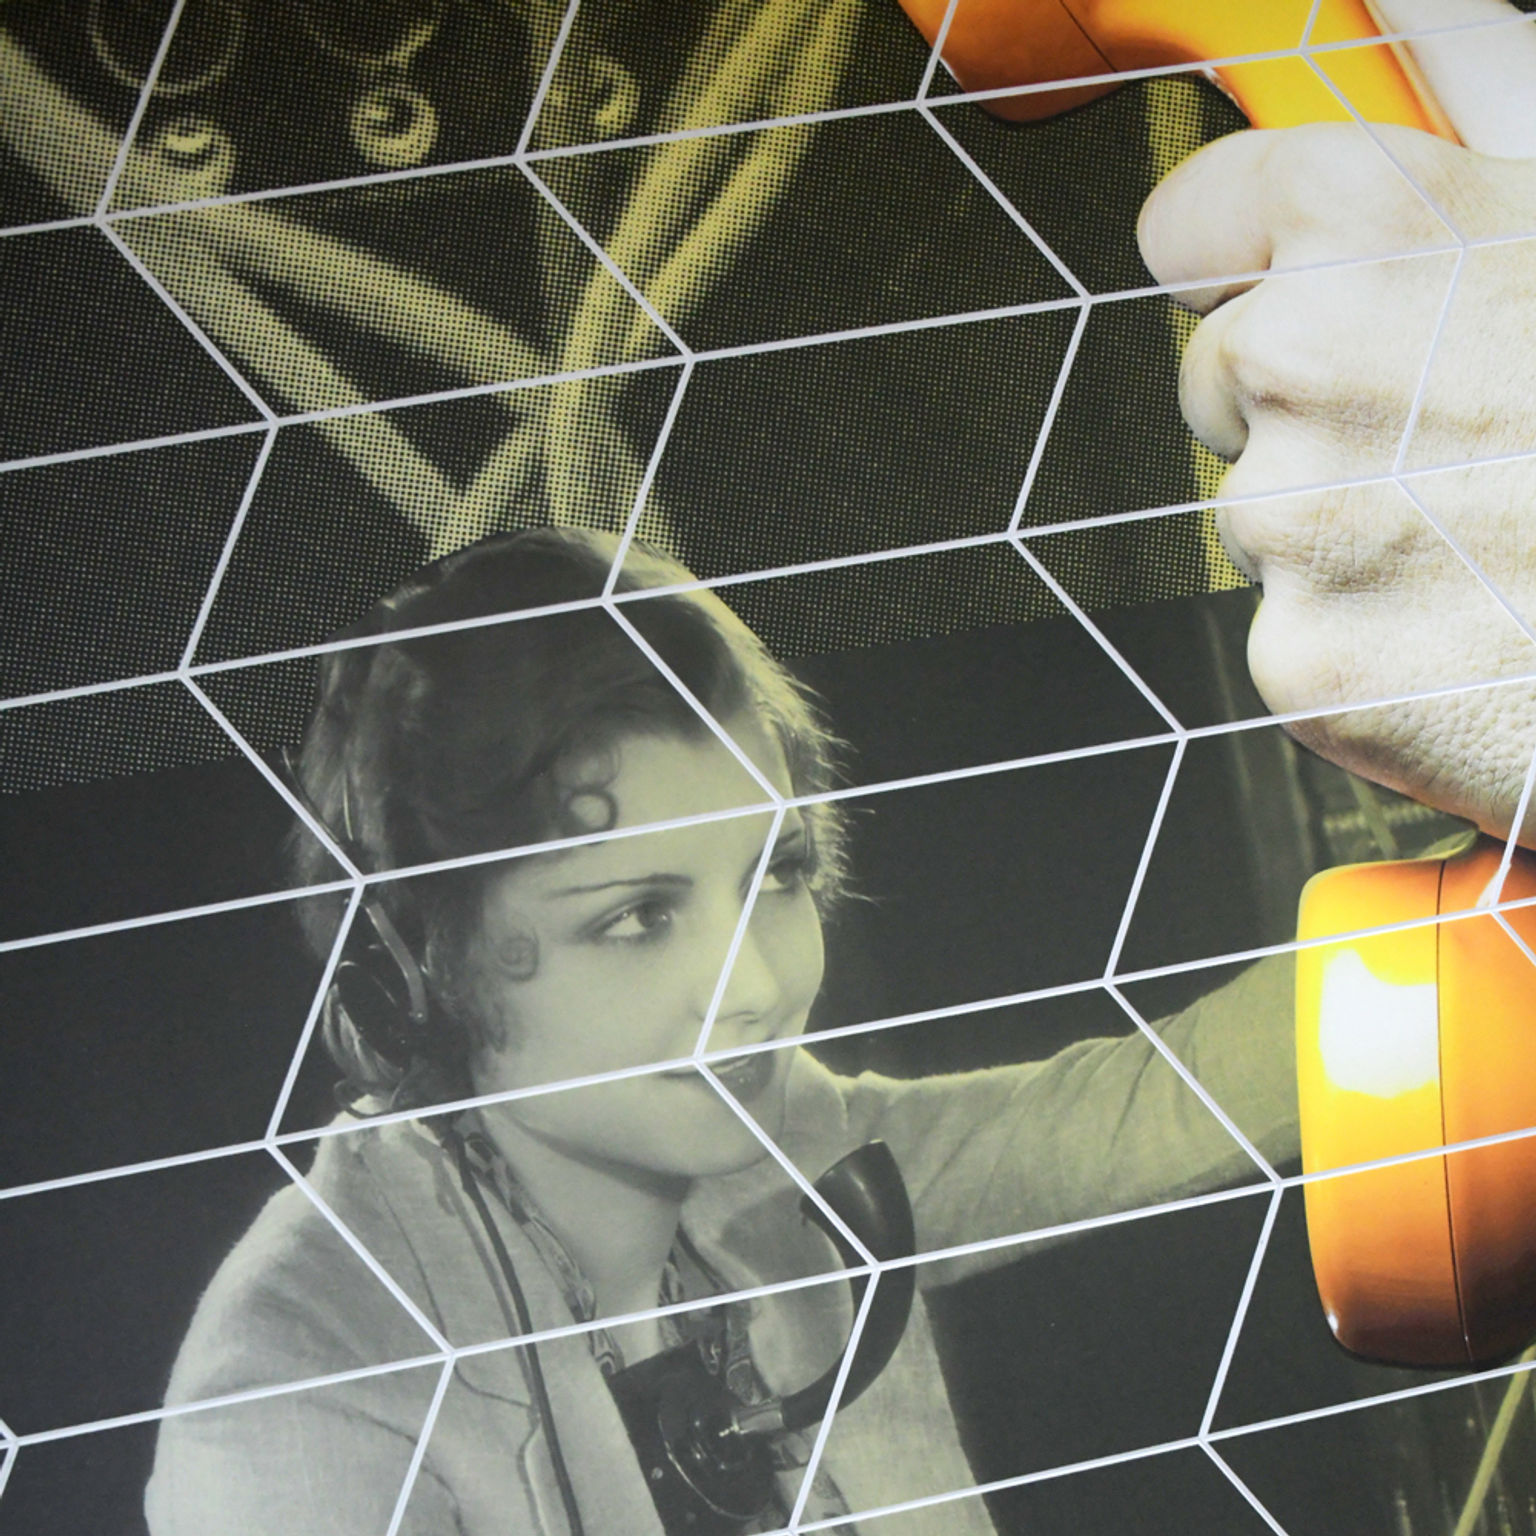 Detail of acoustic tile installation with a custom printed design featuring retro photos of a switchboard operator and phone